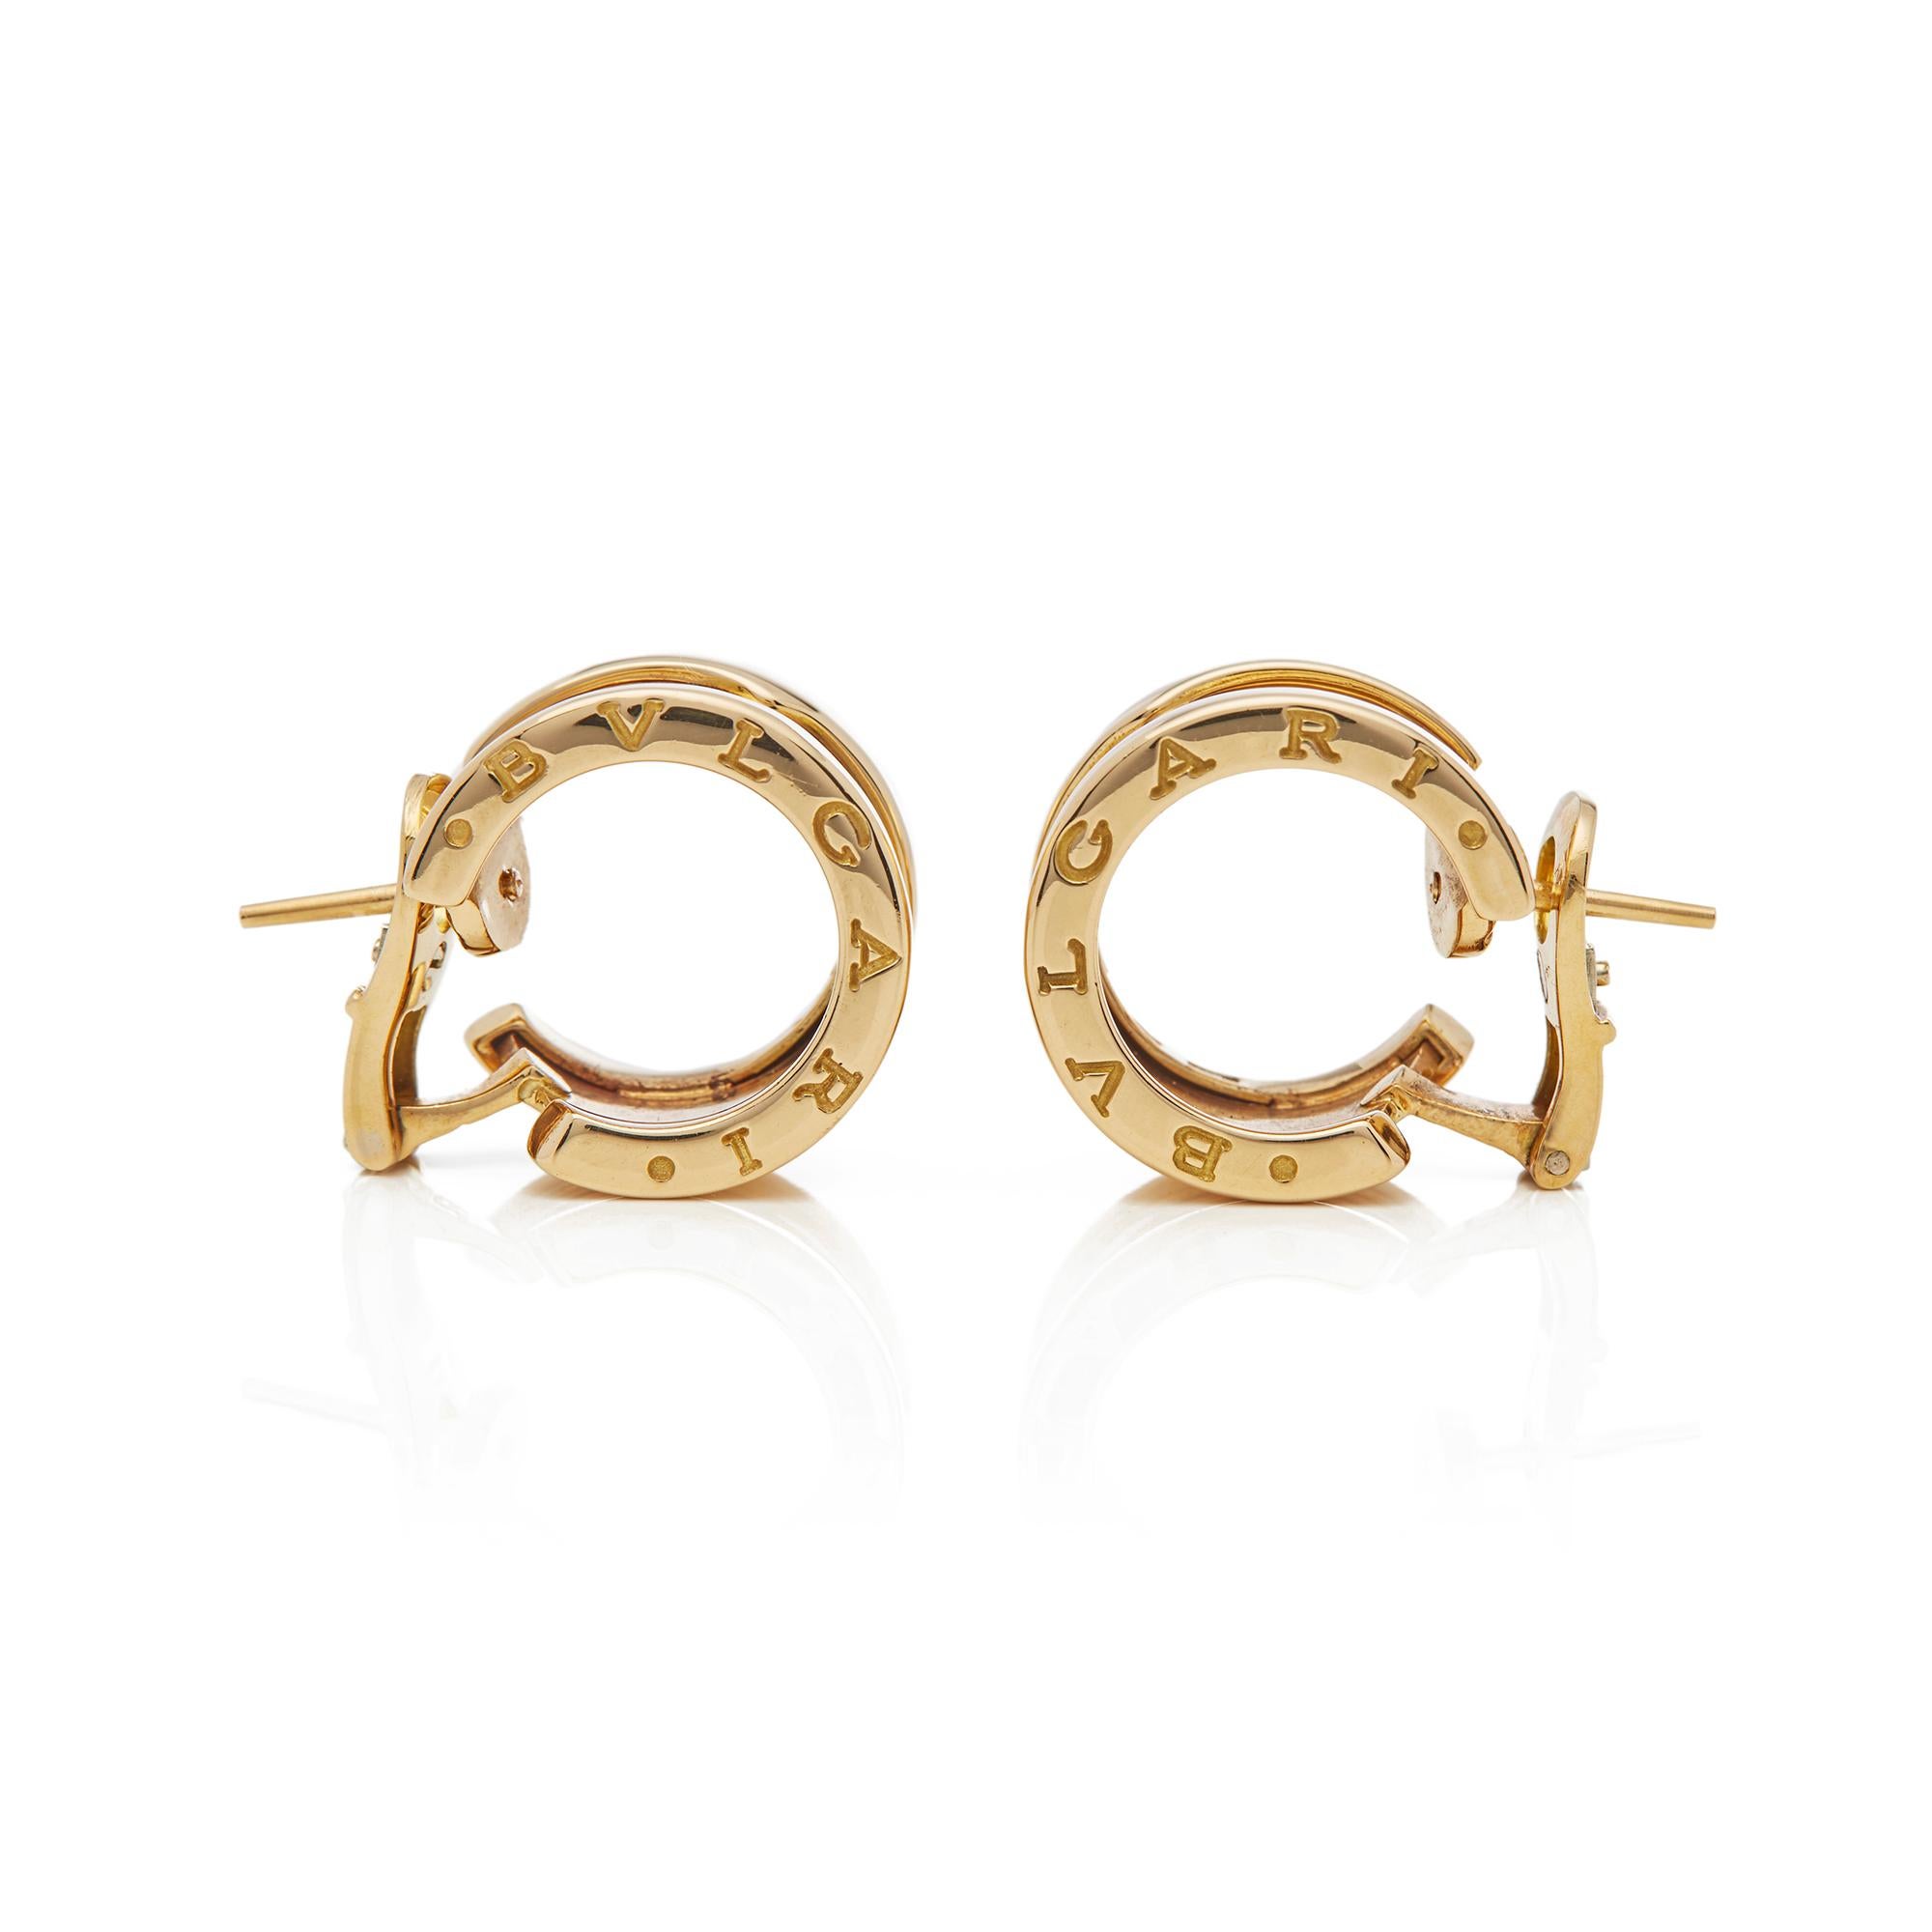 These Earrings by Bulgari are from their B.Zero 1 collection, made in 18k Yellow Gold. The length is 1.6cm and the width is 8mm. These Earrings have secure omega backs. Complete with Bulgari Box. 

